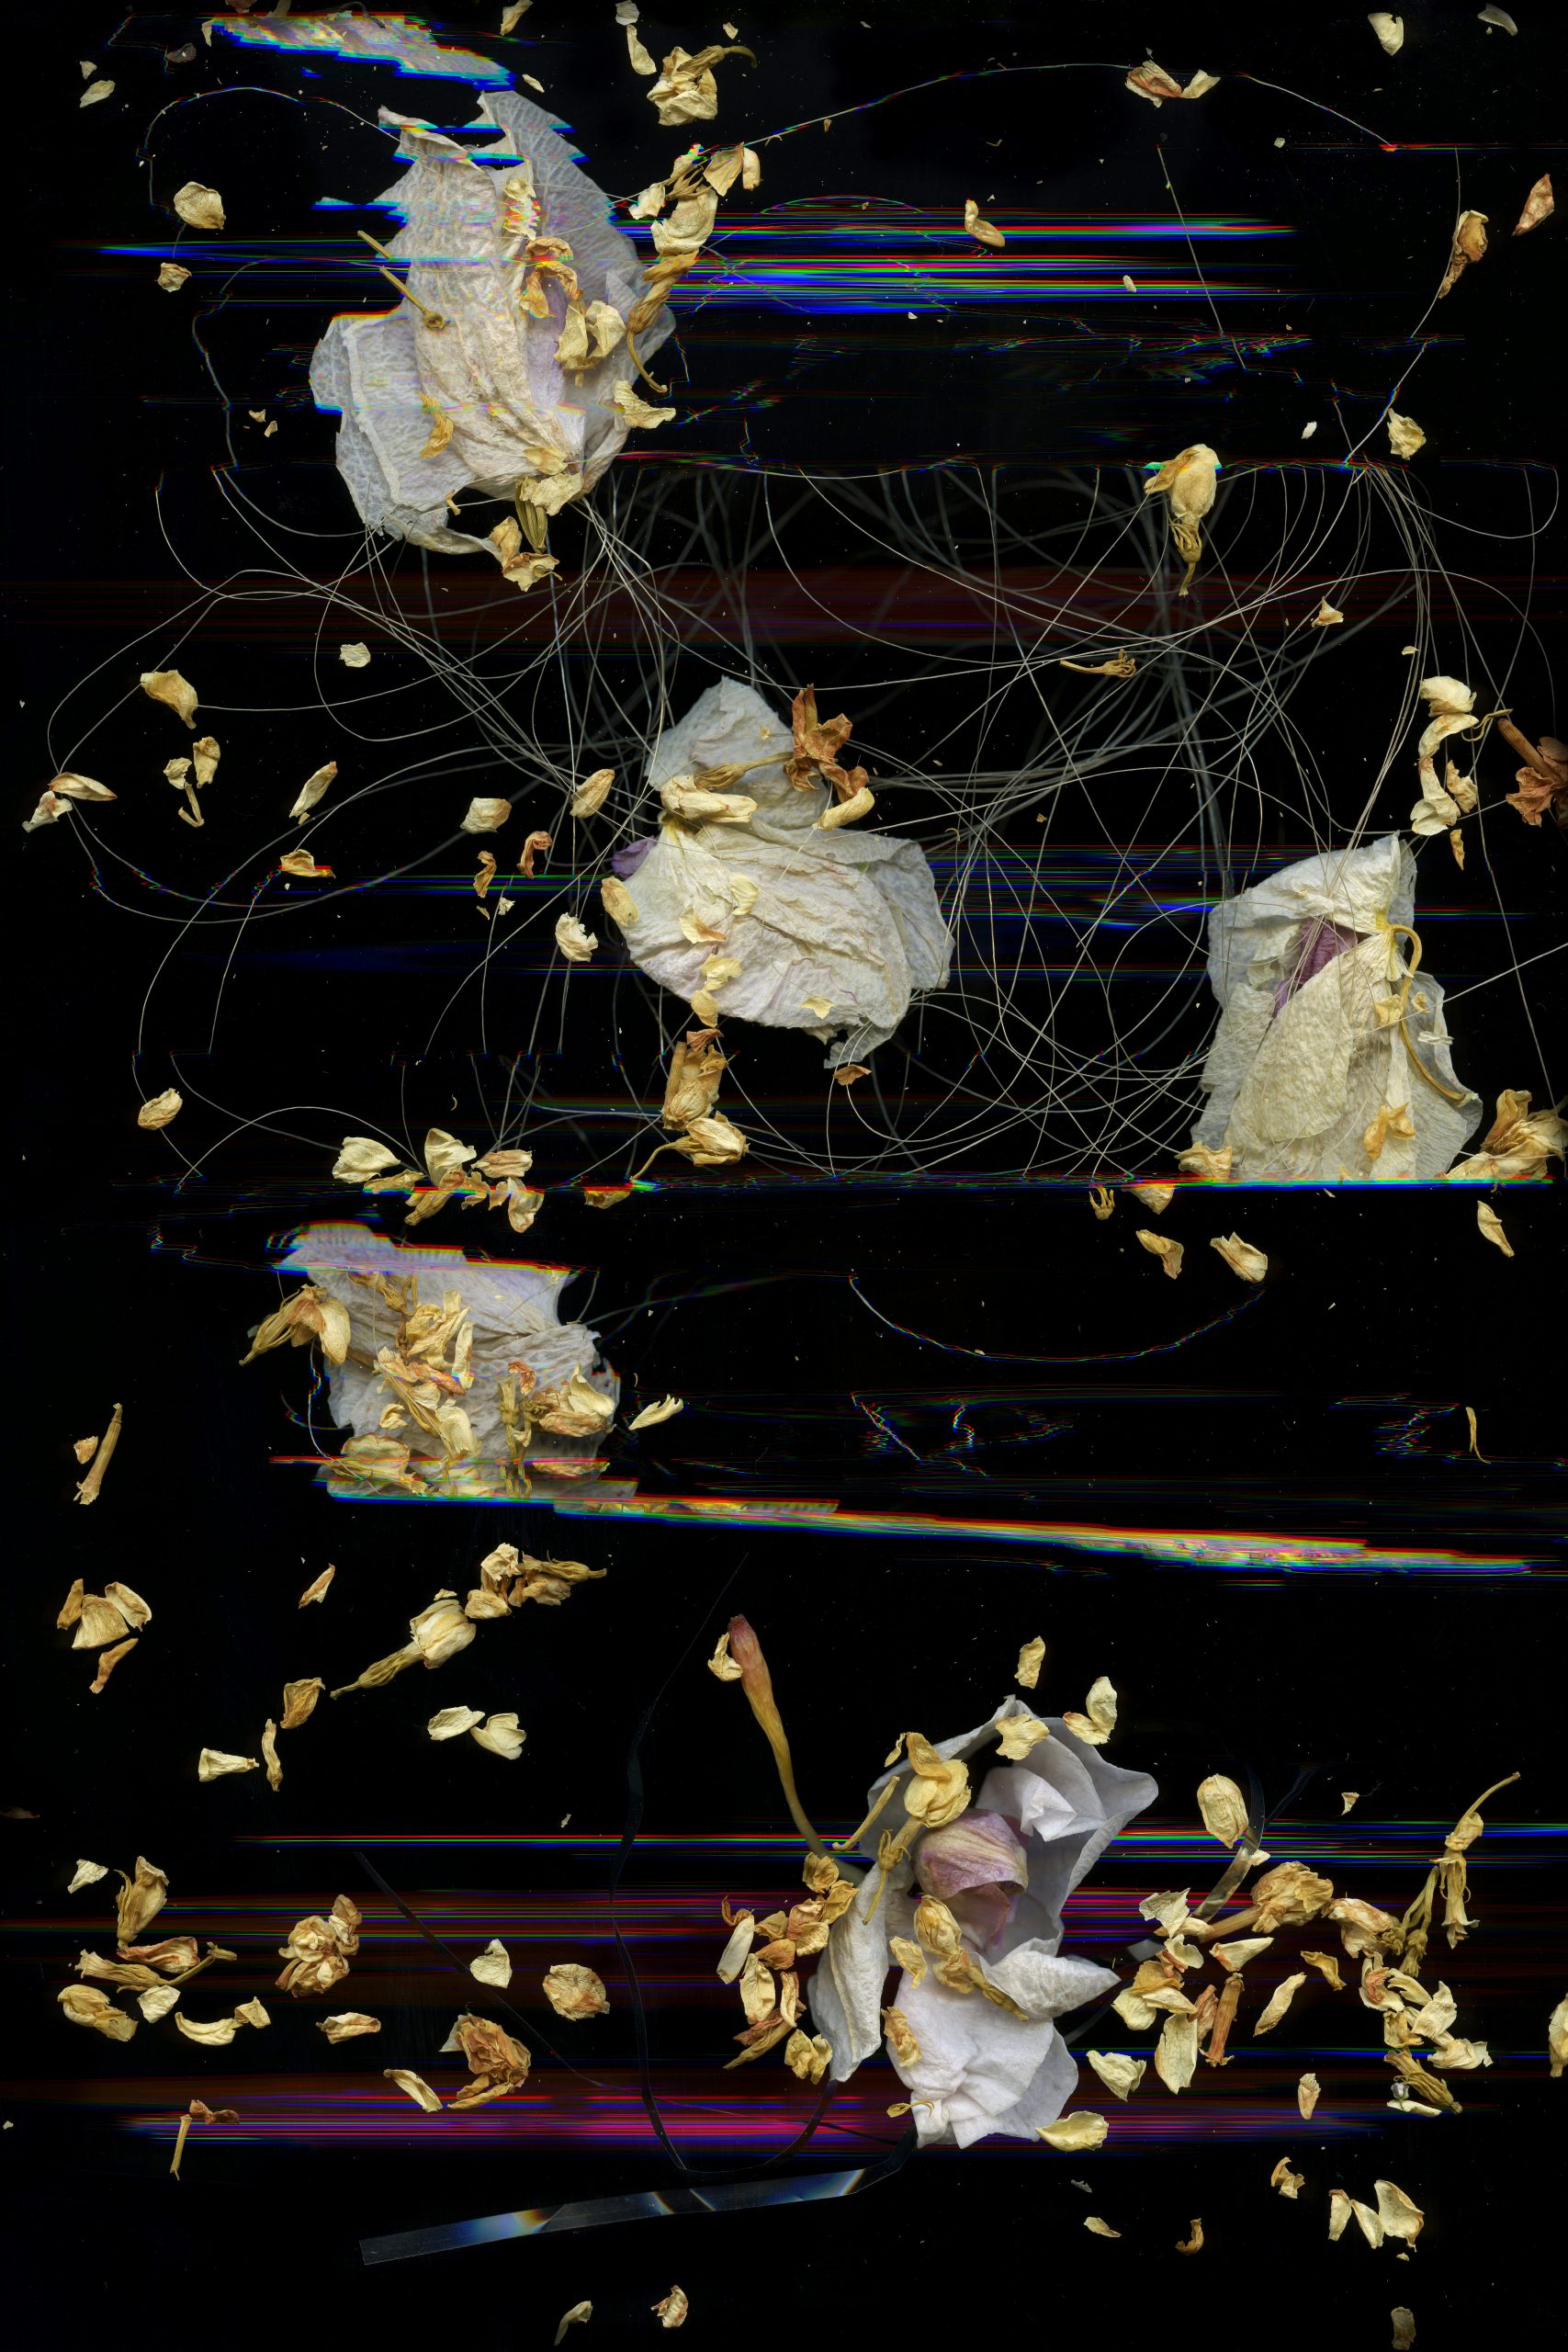 Dried white orchid petals, yellow jasmine buds, and off-white threads are artfully scattered as if floating in space in the foreground of this vertically-oriented digital print. The black background is intermittently disrupted by bands of blue, white, and pink digital disruptions that recall both a sunset and a flatbed scanner error.